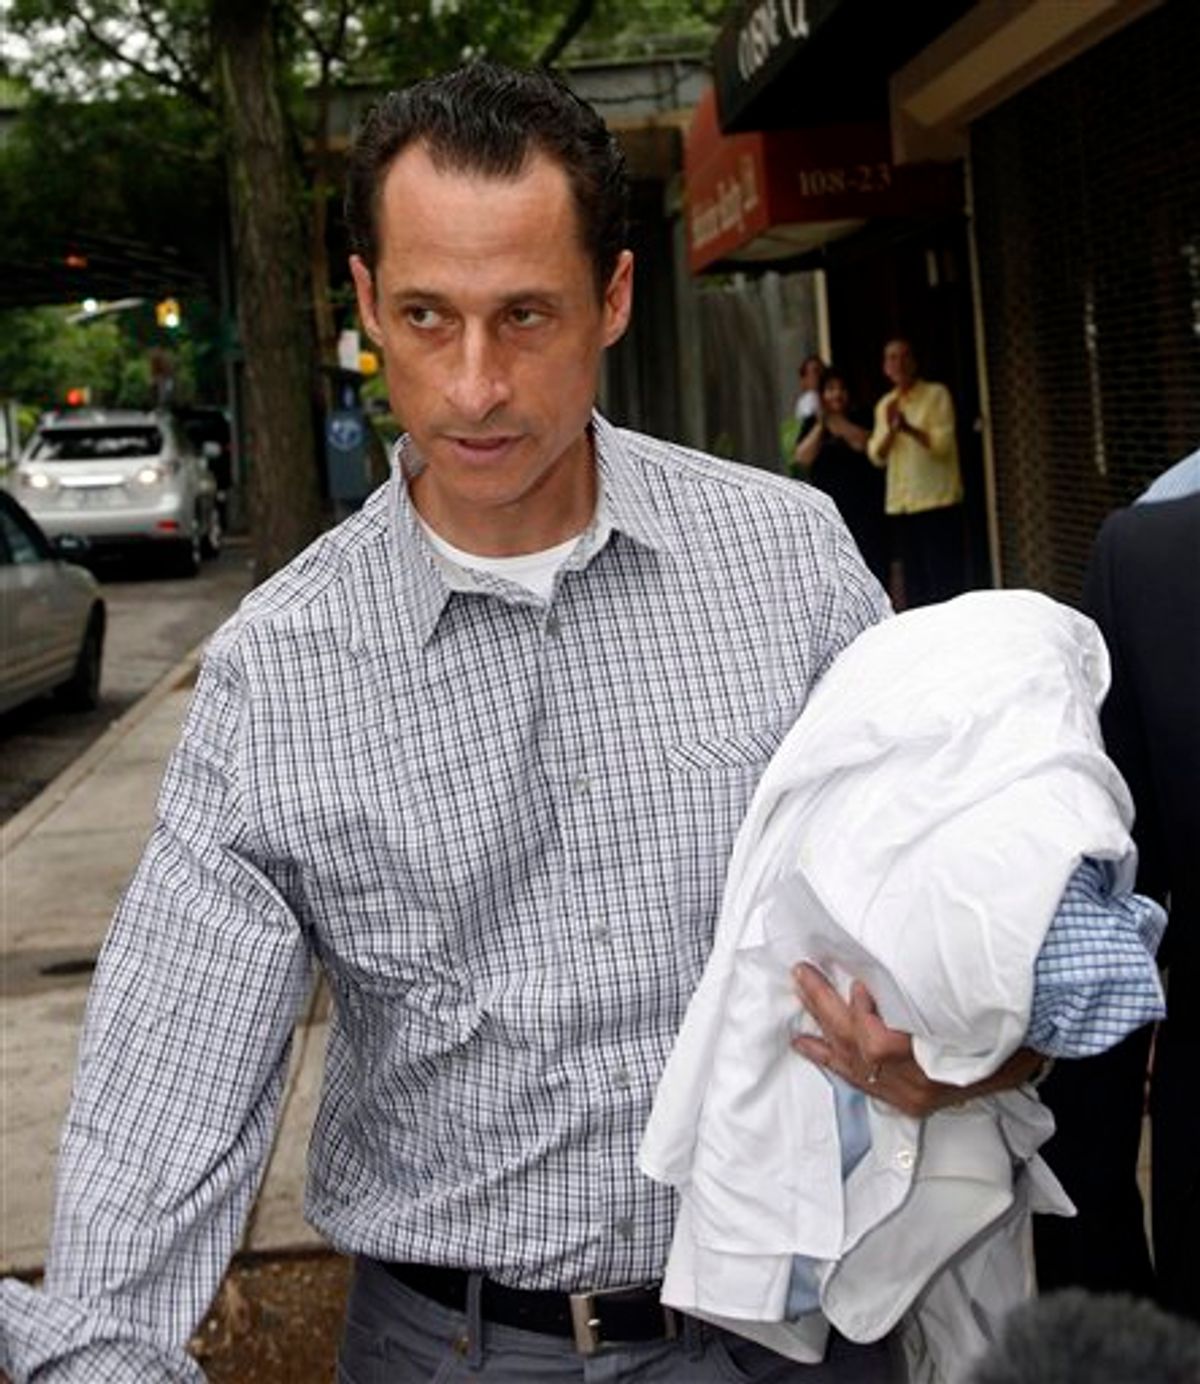 Rep. Anthony Weiner, D-N.Y., carries his laundry to a laundromat near his home in the Queens borough of New York, Saturday, June  11, 2011. The 46-year-old congressman acknowledged Friday that he had online contact with a 17-year-old girl from Delaware but said there was nothing inappropriate. (AP Photo/David Karp) (AP)